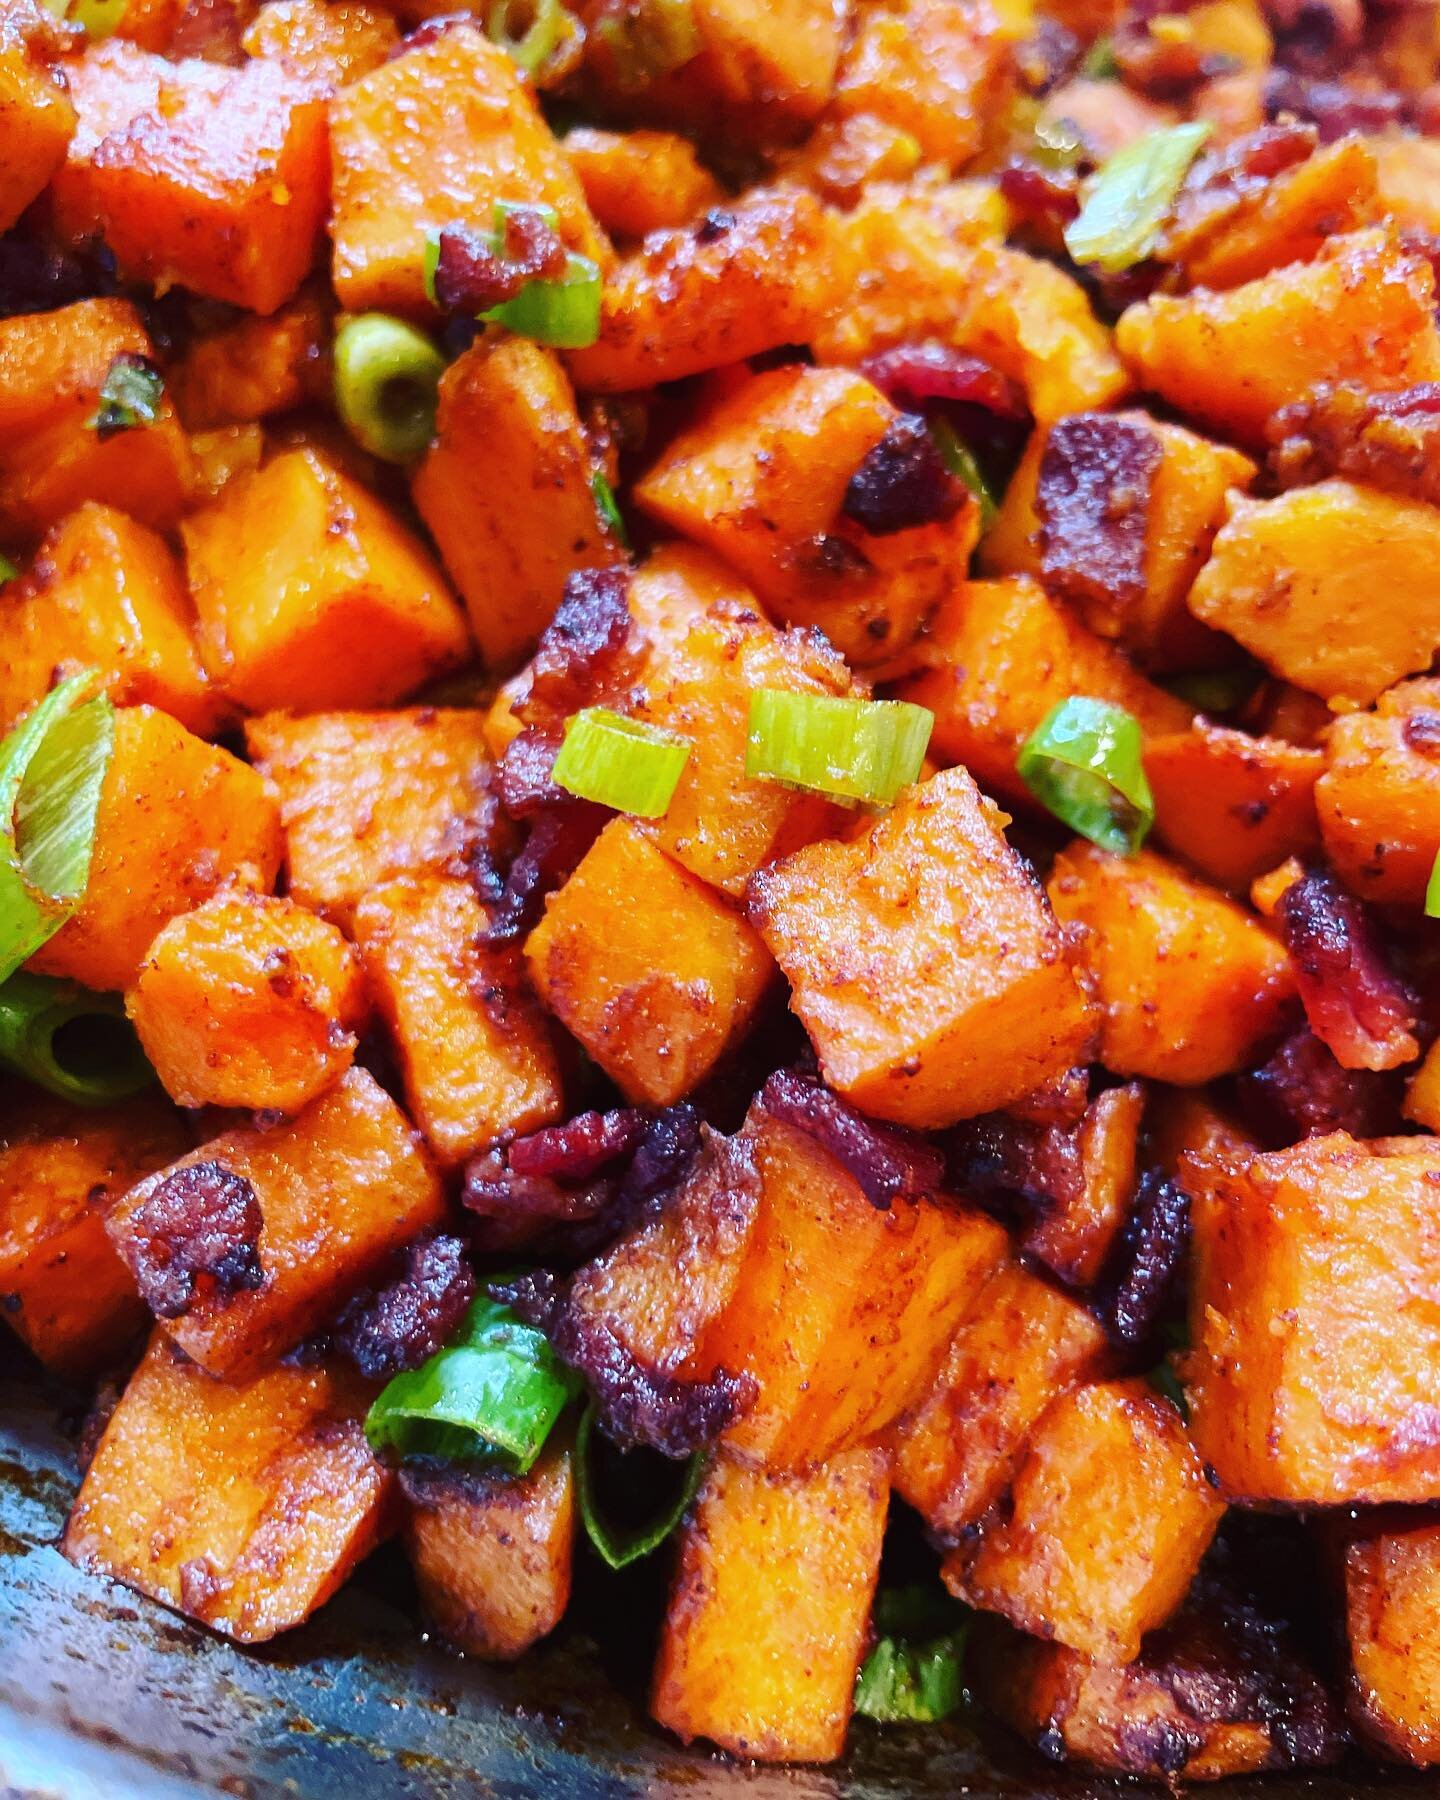 We spend most of our weekdays meal planning and prepping for clients in the Charleston area. Sweet potato hash with applewood smoked bacon and scallions is a delicious side or midday meal on its own! #personalchef #charlestonsc #mealprep #travelchef 